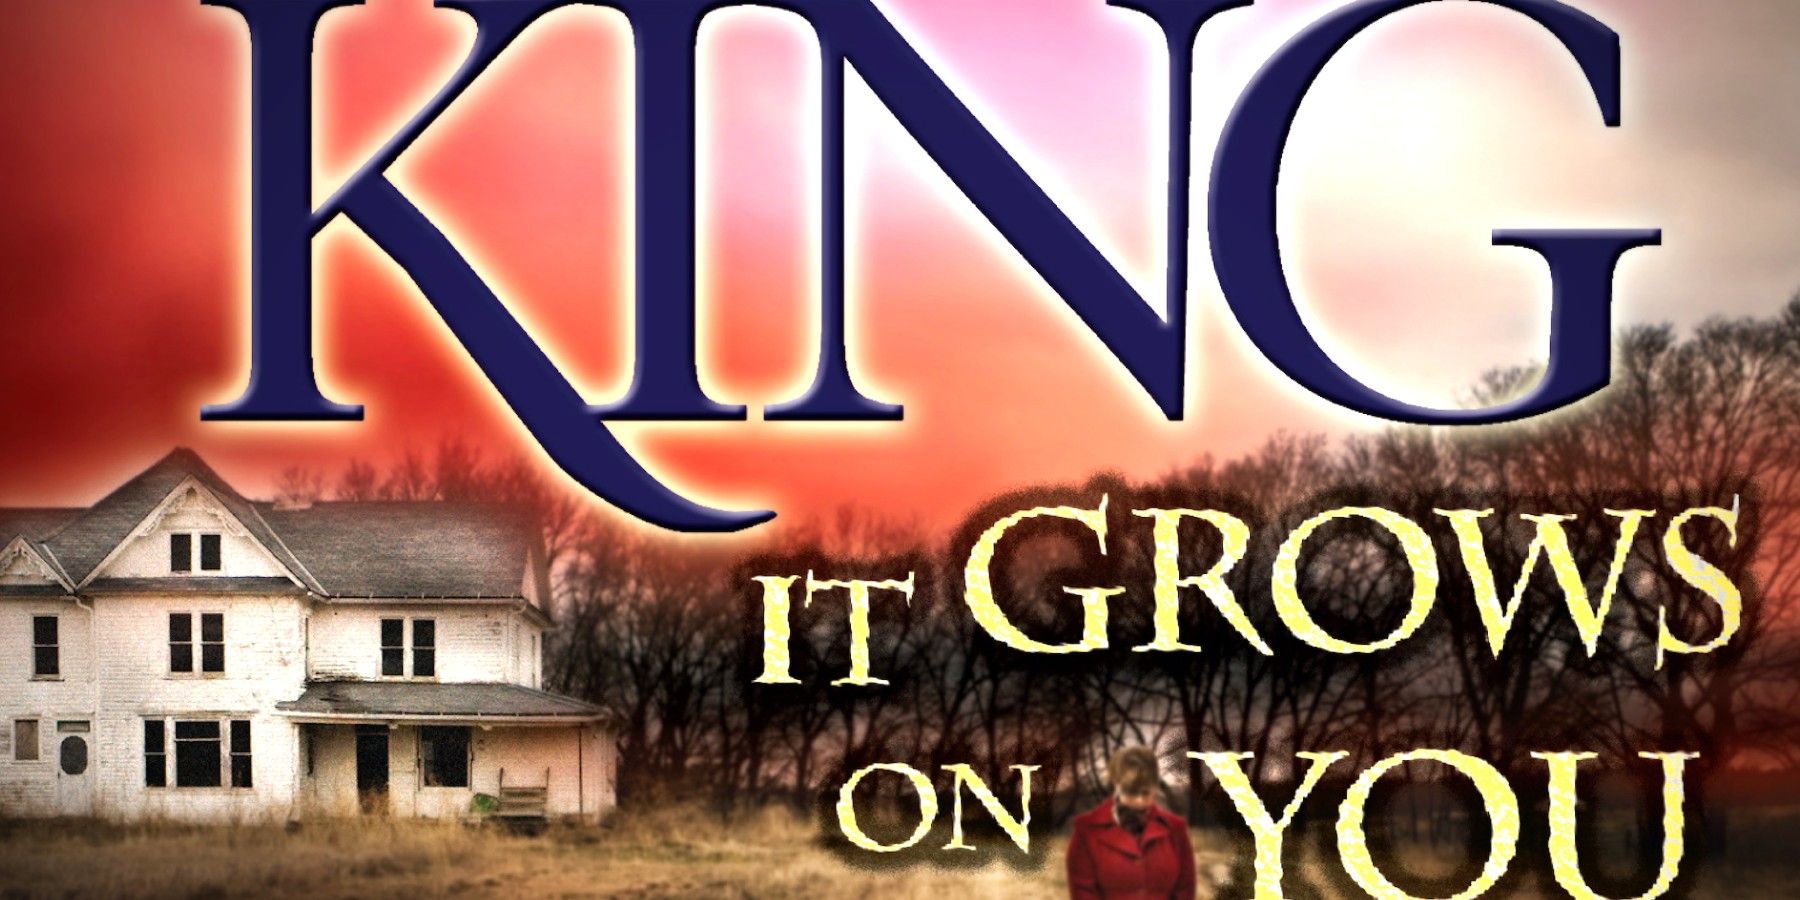 Stephen King's It Grows on You